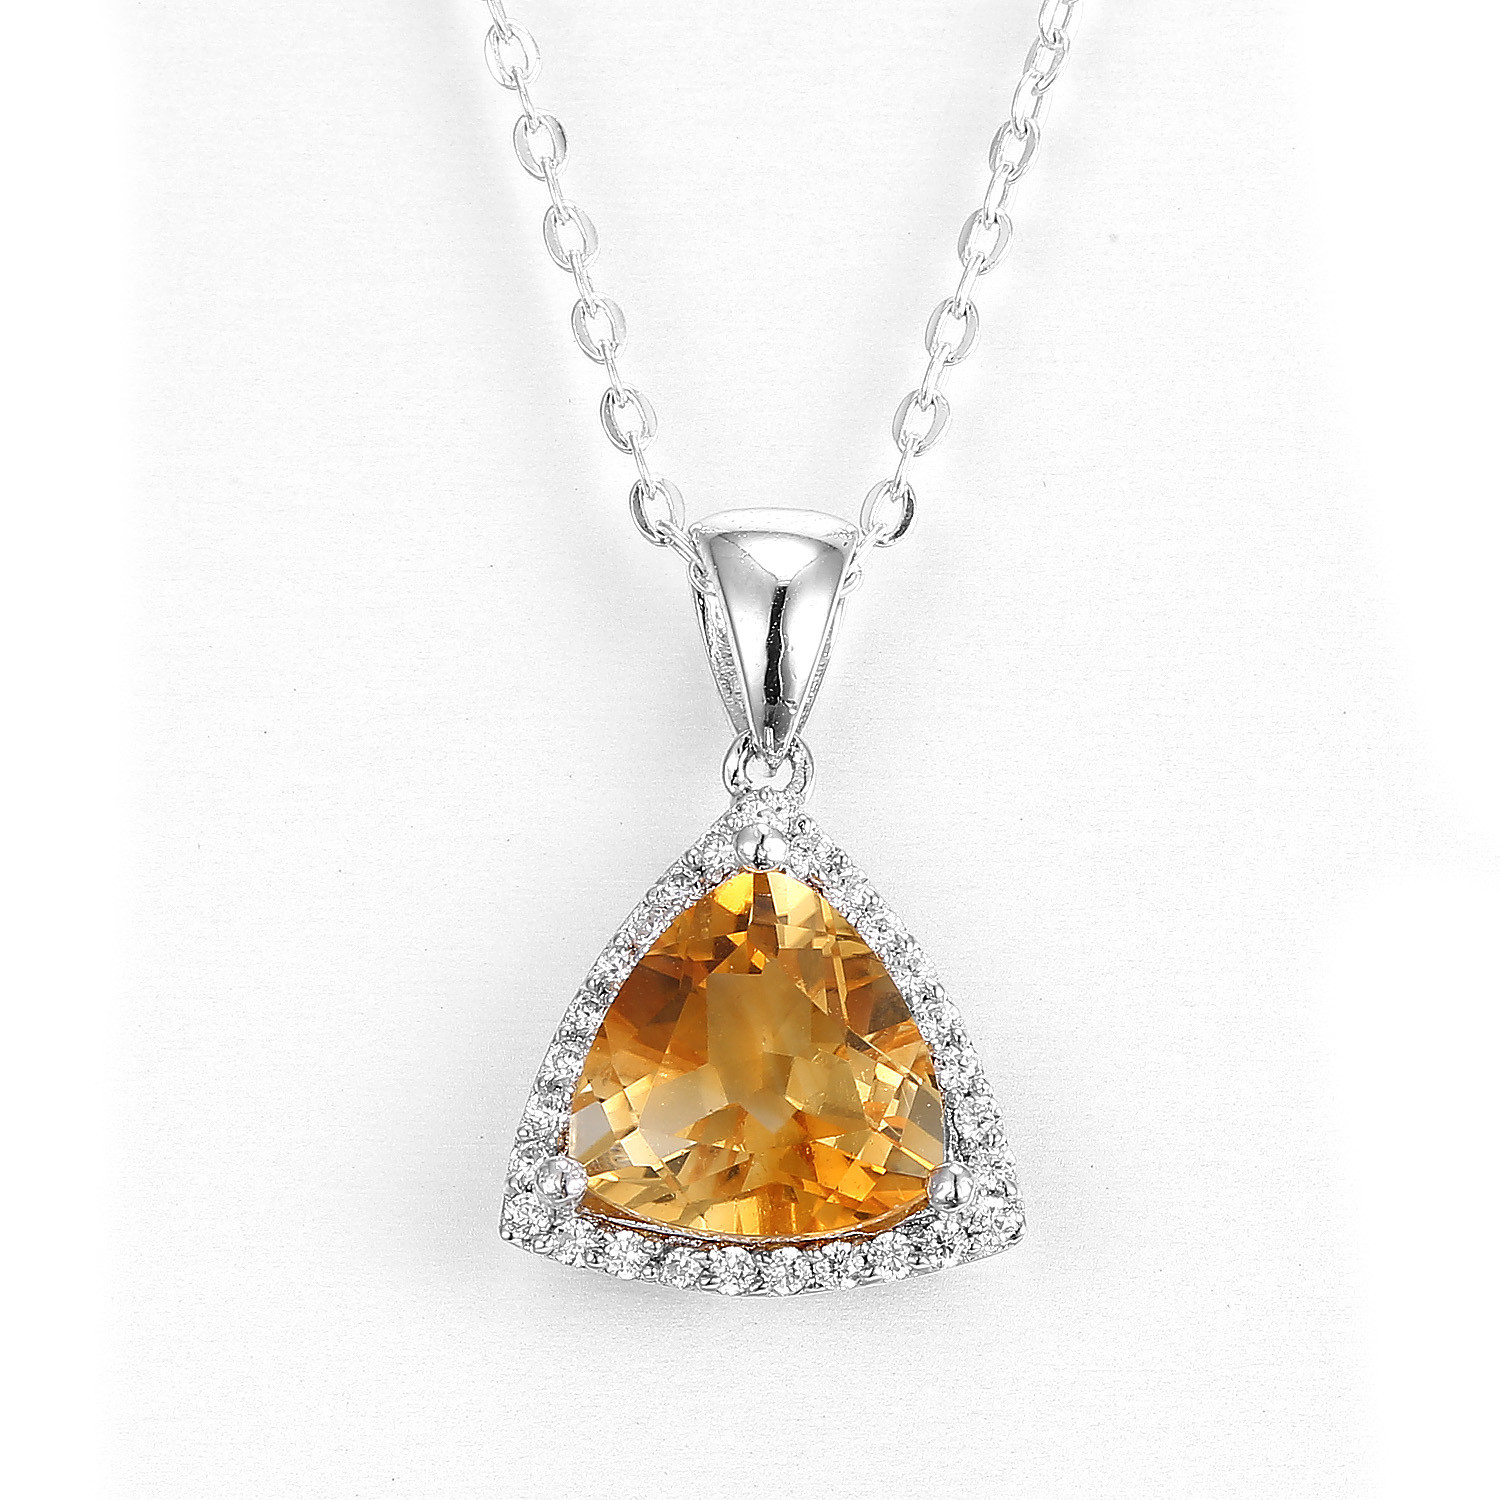 Wholesale 10mm 925 Silver Gemstone Pendant Yellow Triangle Citrine November Birthstone Charms from china suppliers